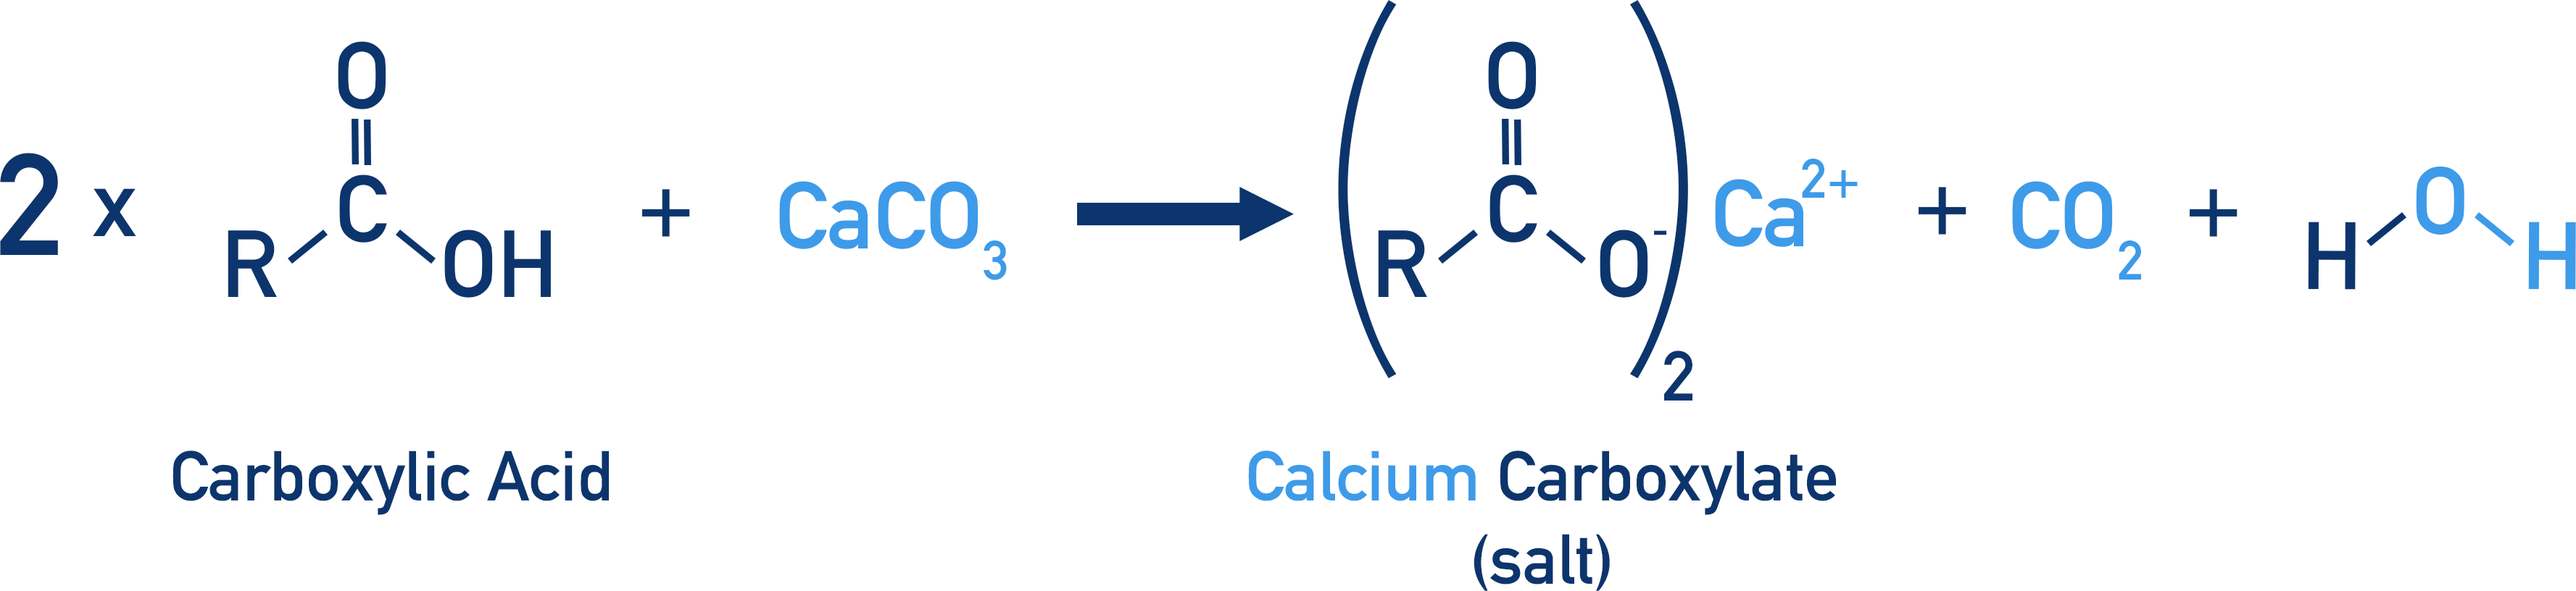 carboxylic acid with calcium carbonate to form salt calcium carboxylate and carbon dioxide and water